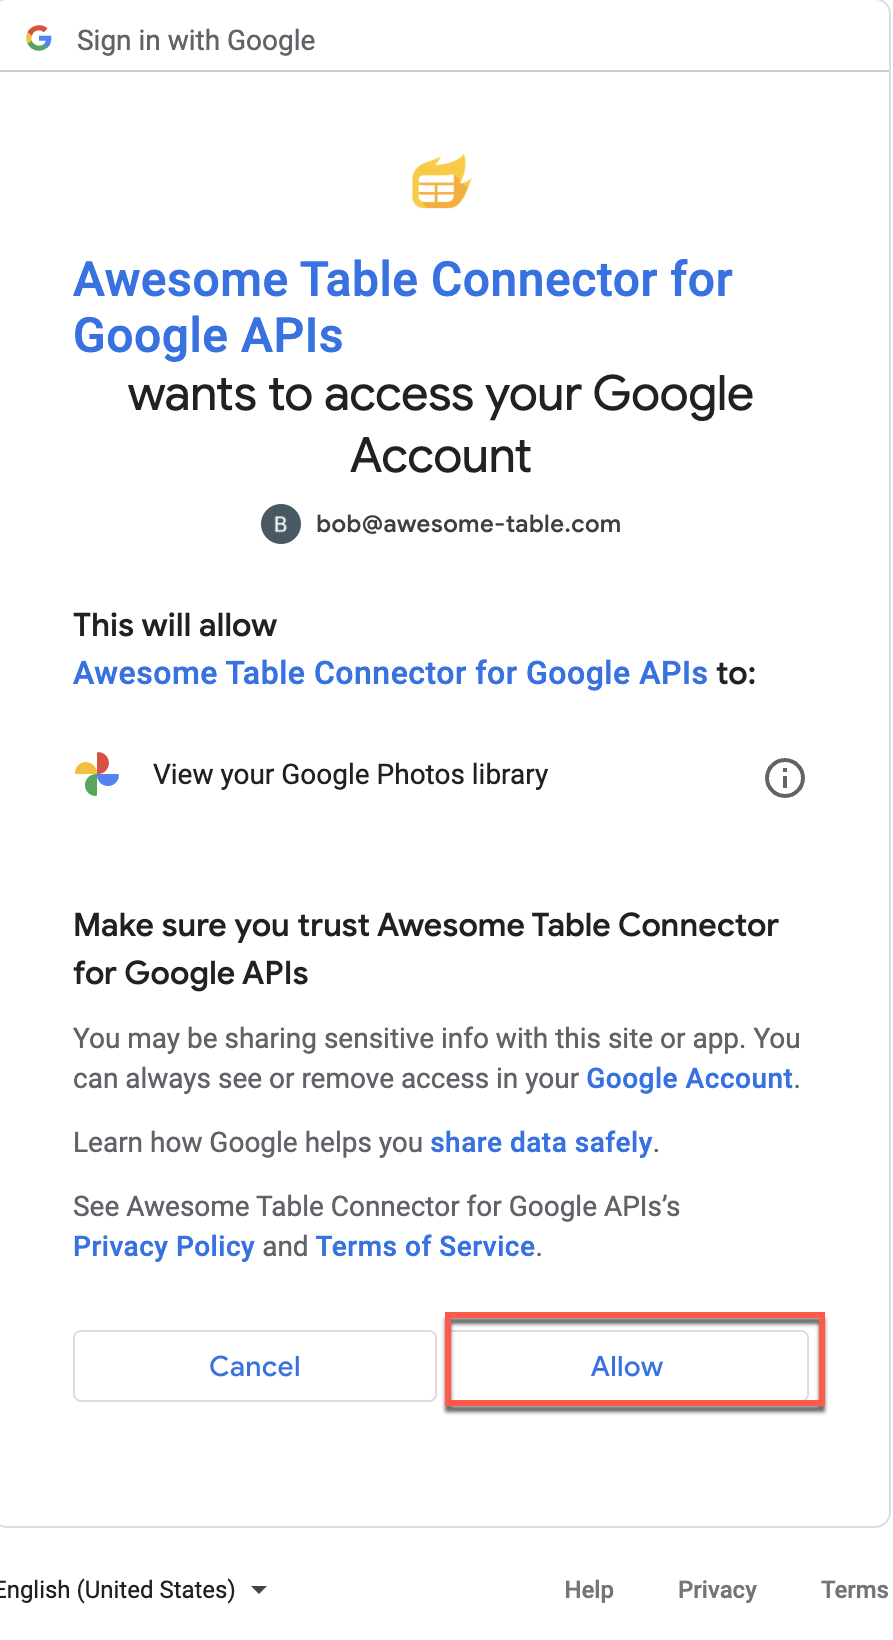 It allows Awesome Table Connectors to view your Google Photos library